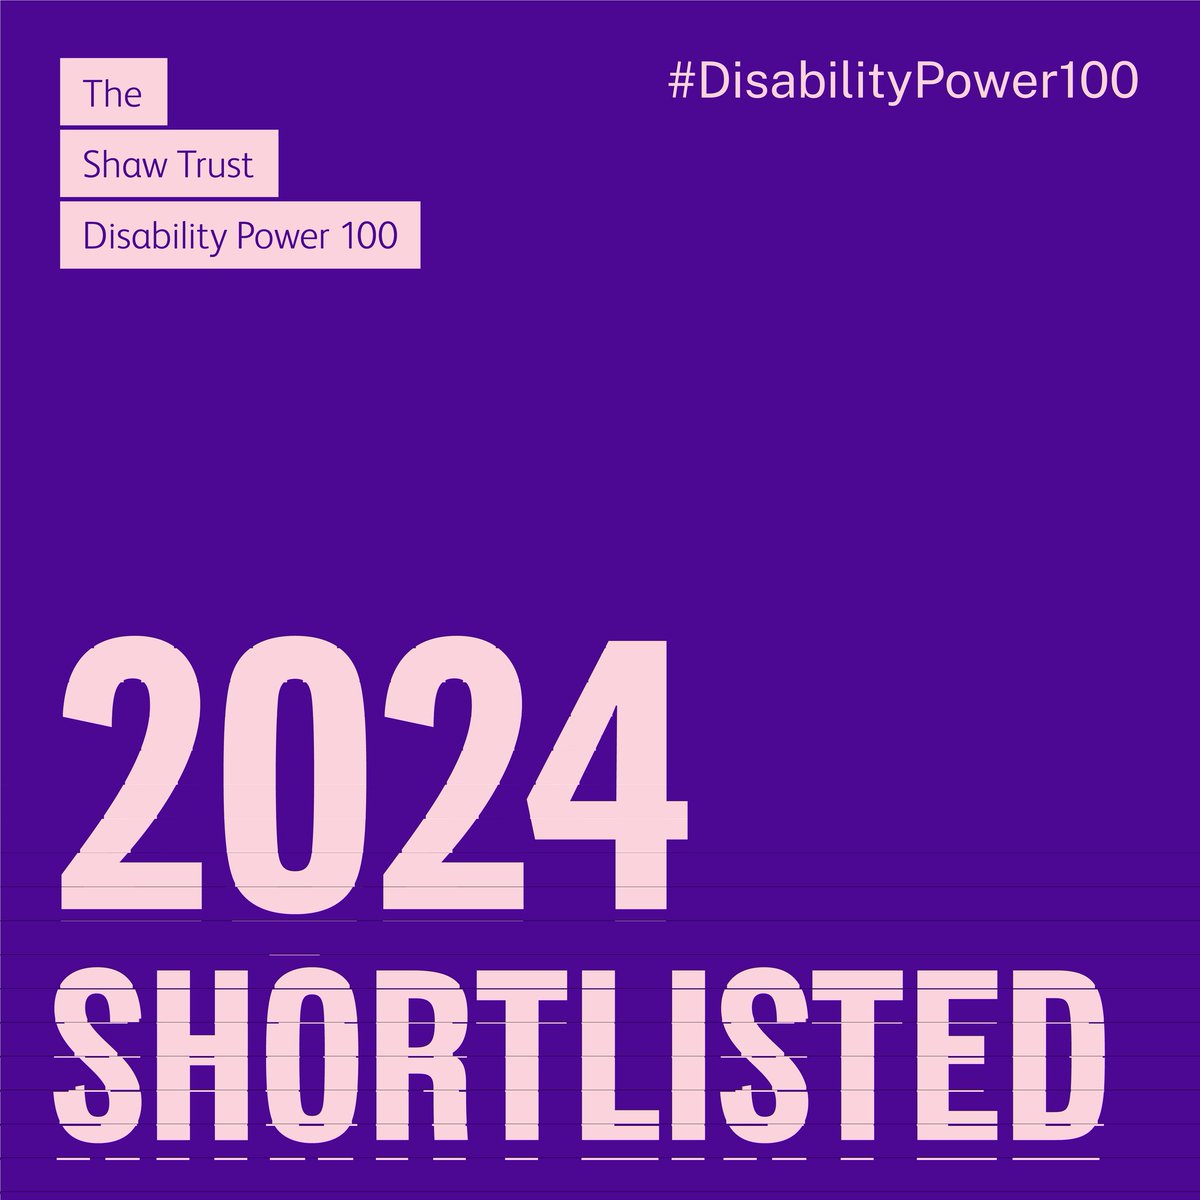 Overcame my imposter syndrome to share some exciting news: I'm shortlisted for @ShawTrust #DisabilityPower100! Honored to be recognized alongside such inspiring individuals. This feels like a win already! Grateful to everyone supporting disabled communities everywhere inc  🍉